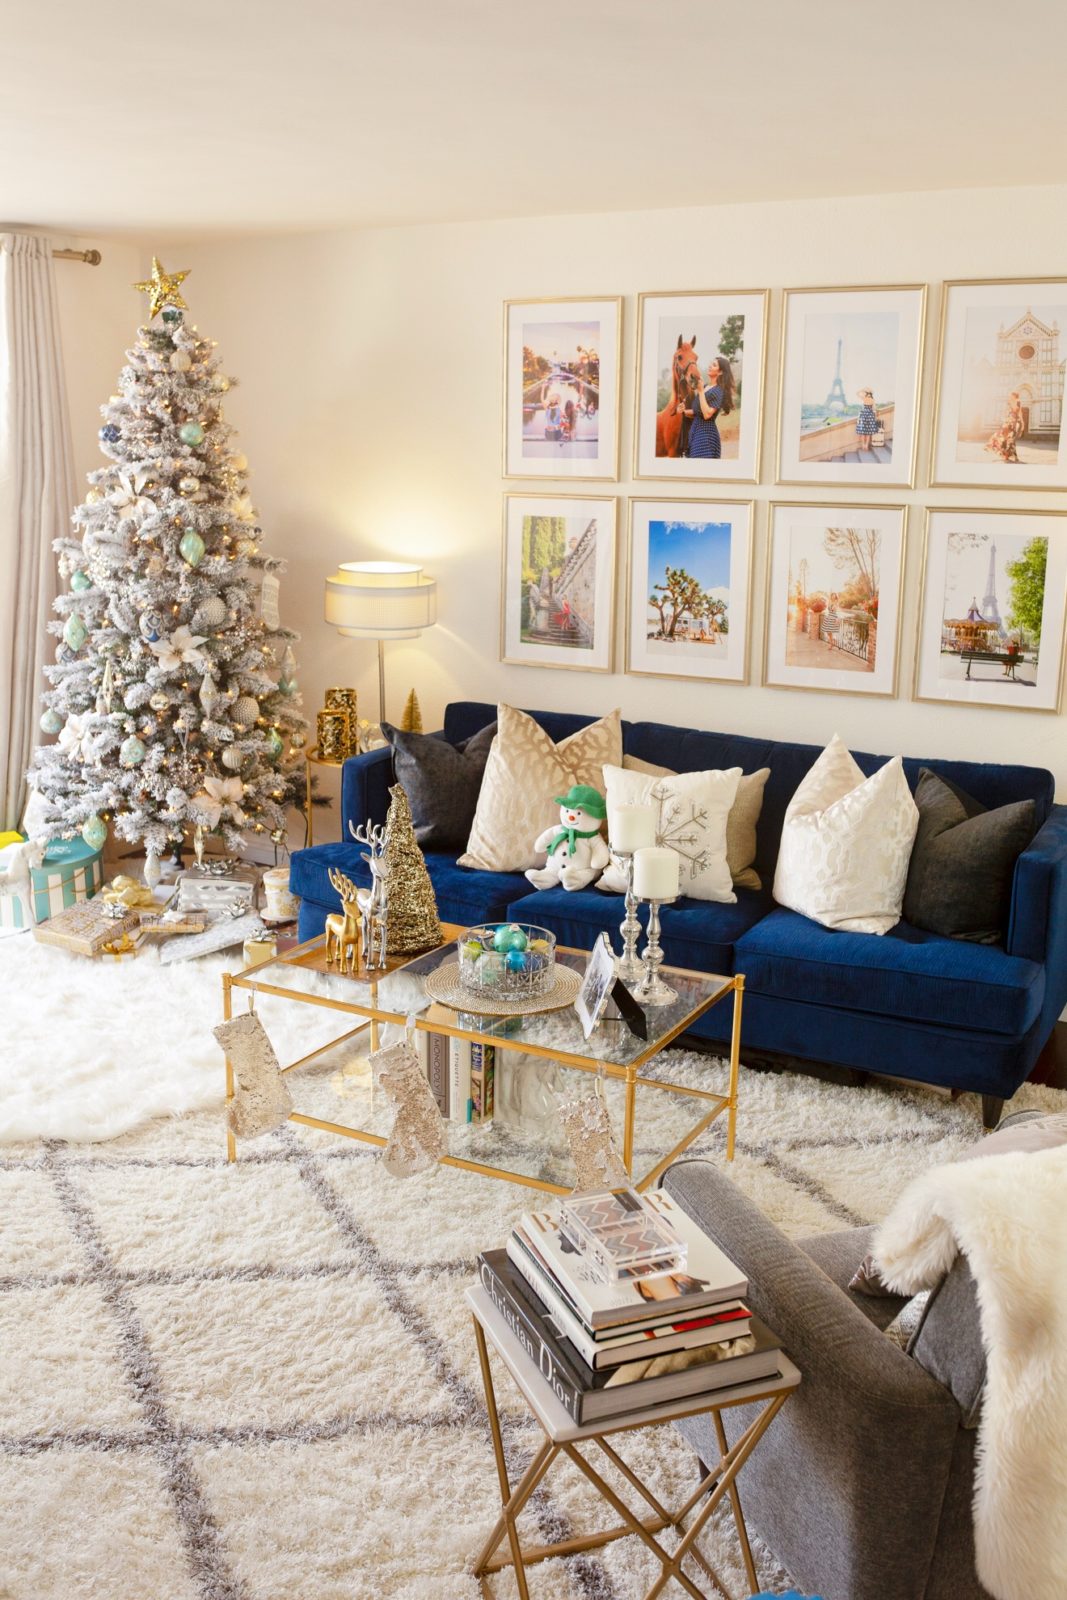 Holiday Home Decor by Home Decor Blogger Laura Lily, Christmas Decorating Ideas, | Holiday Home Decor 2019 by popular Los Angeles life and style blogger, Laura Lily: image of a living room decorated with holiday decor.